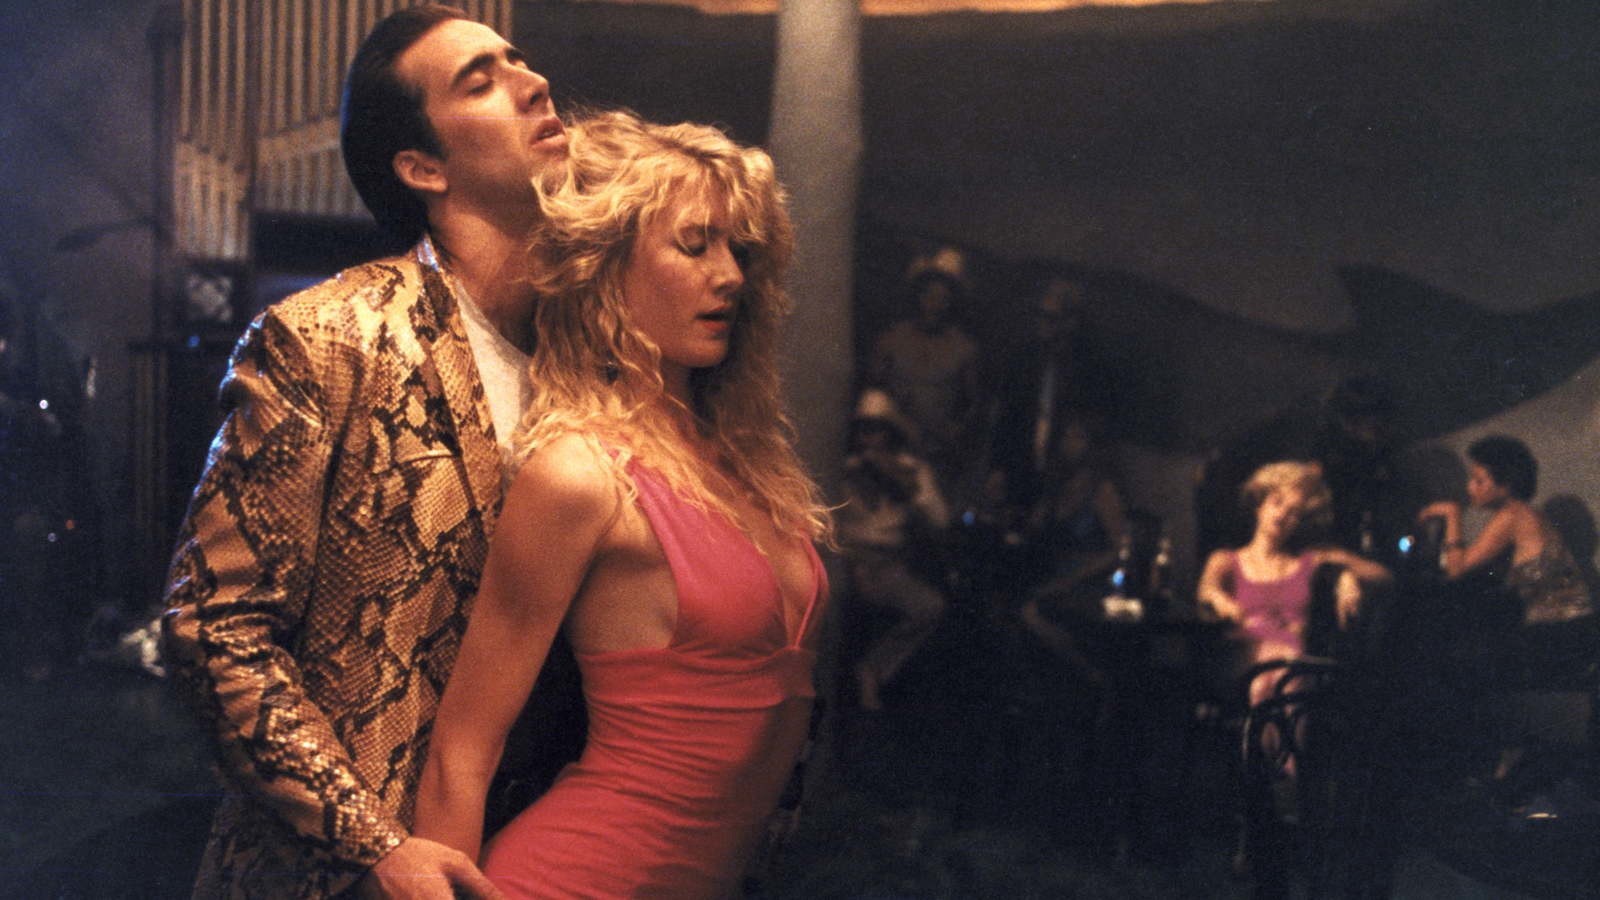 7 cult romance films to watch alone